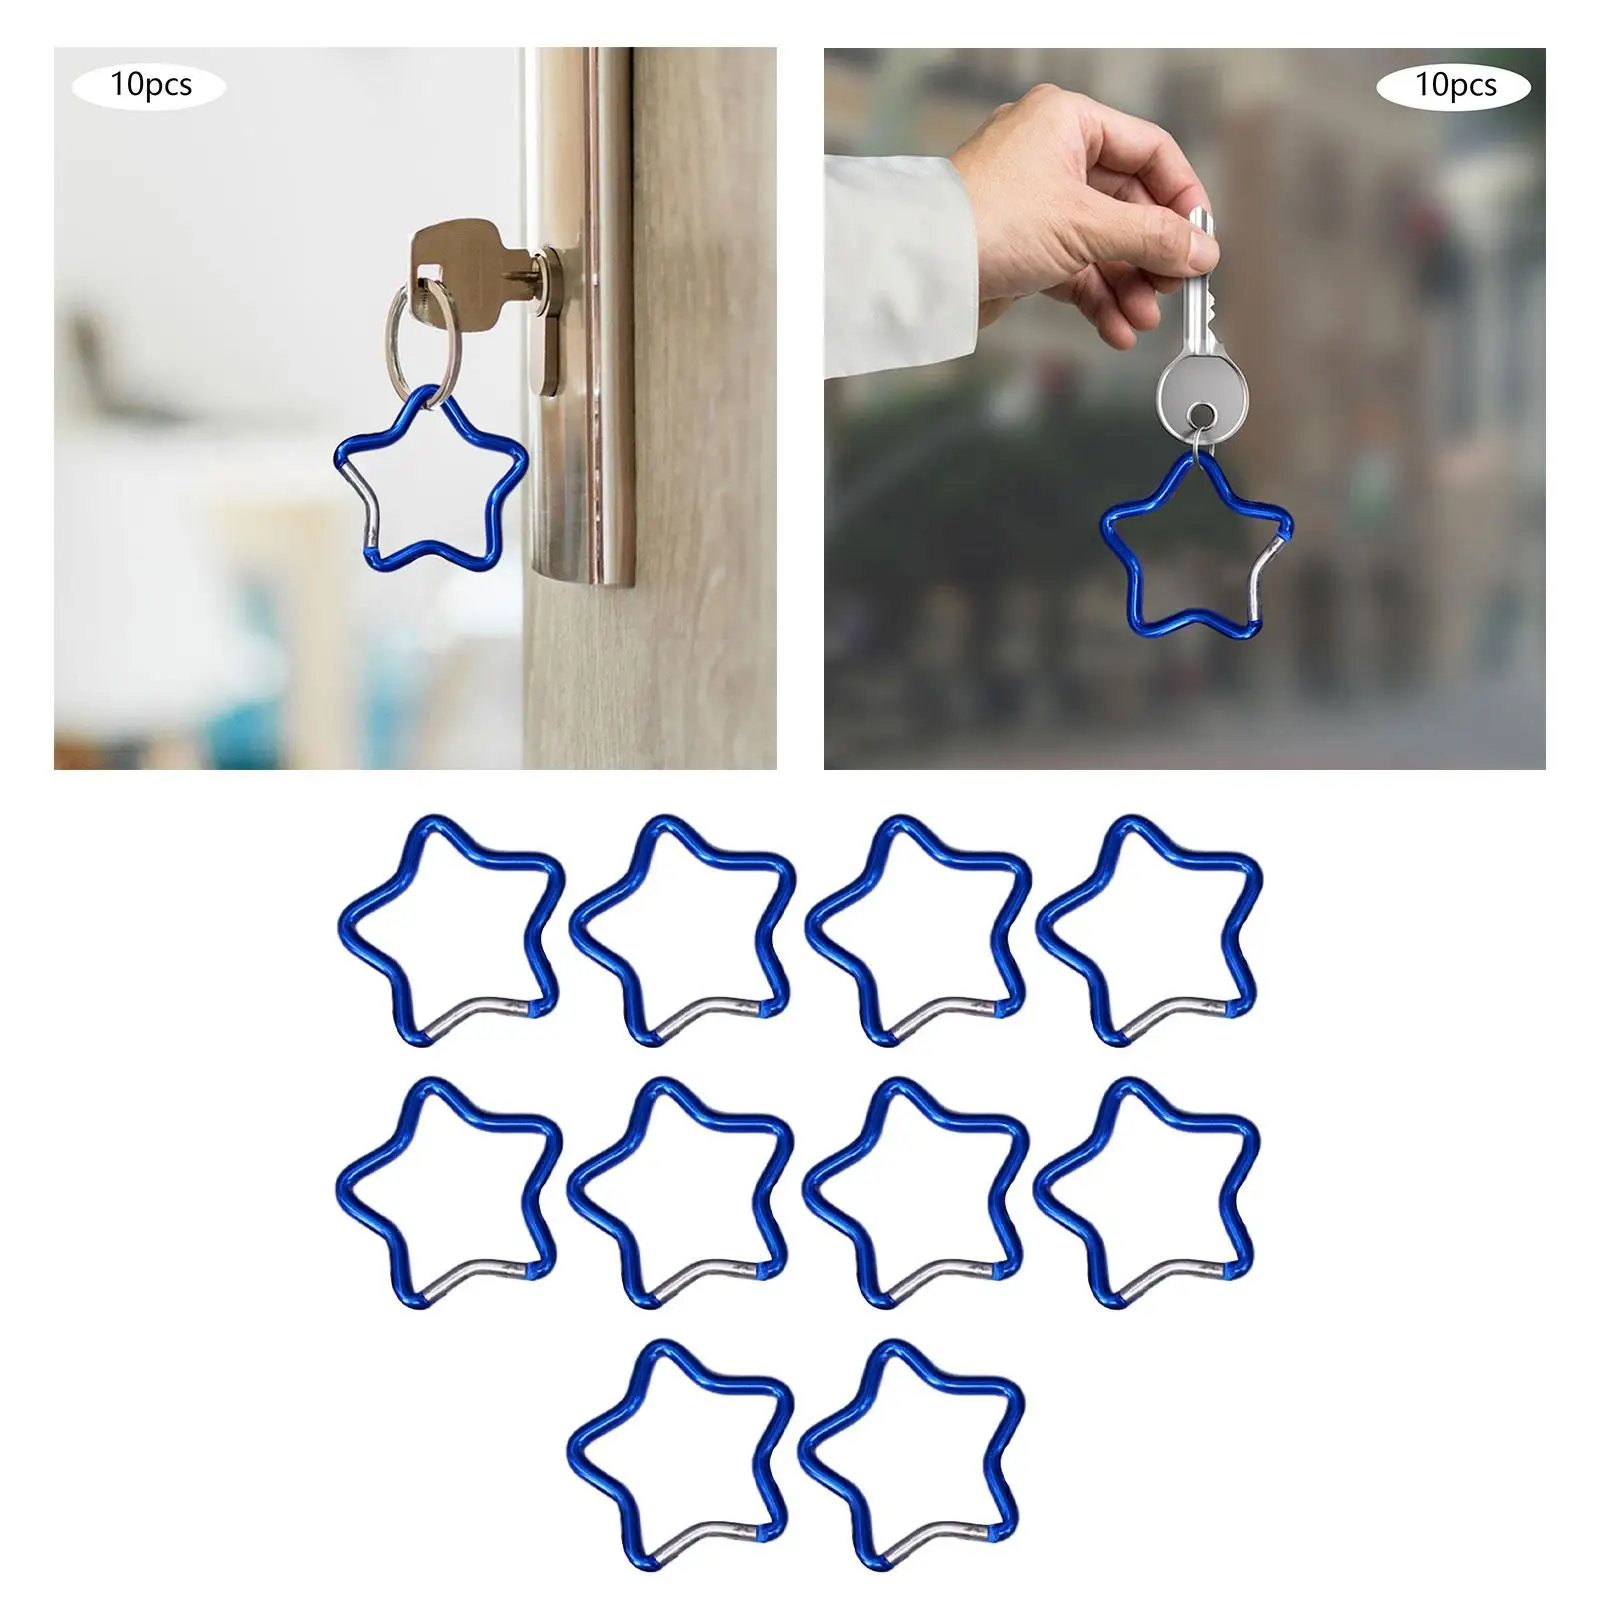 10Pcs Five Pointed Star Shaped Carabiner Small Carabiner Key Chain Clip for Keychains Dog Leash Traveling Hiking Accessory